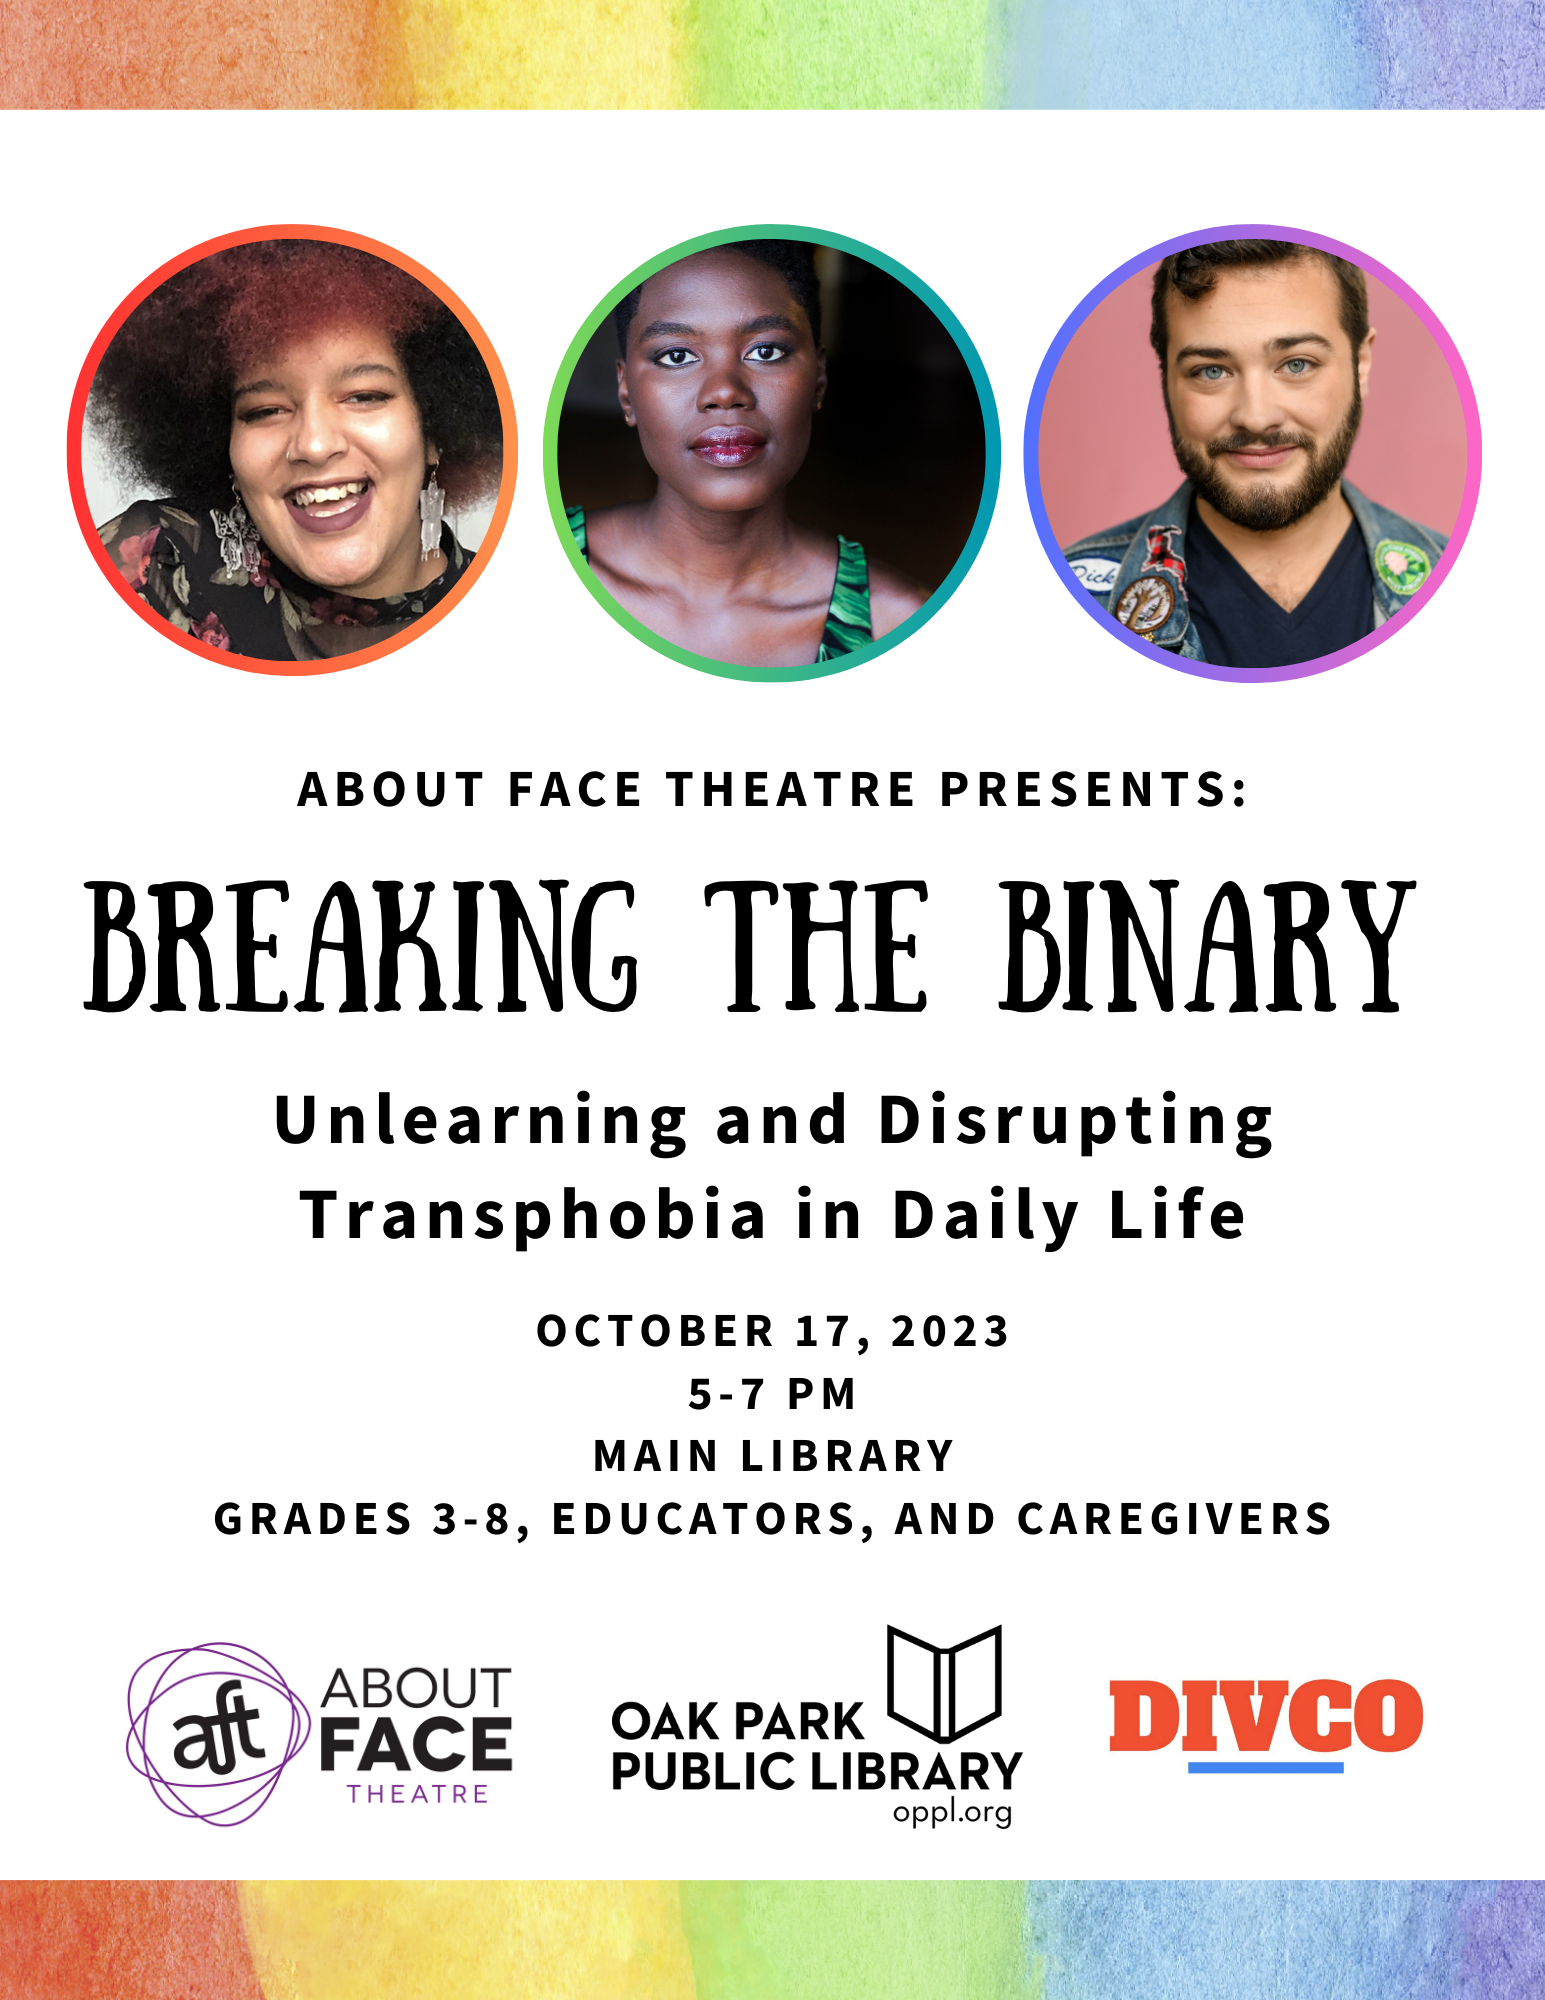 About Face Theatre Presents: Breaking the Binary: Unlearning and Disrupting Transphobia in Daily Life